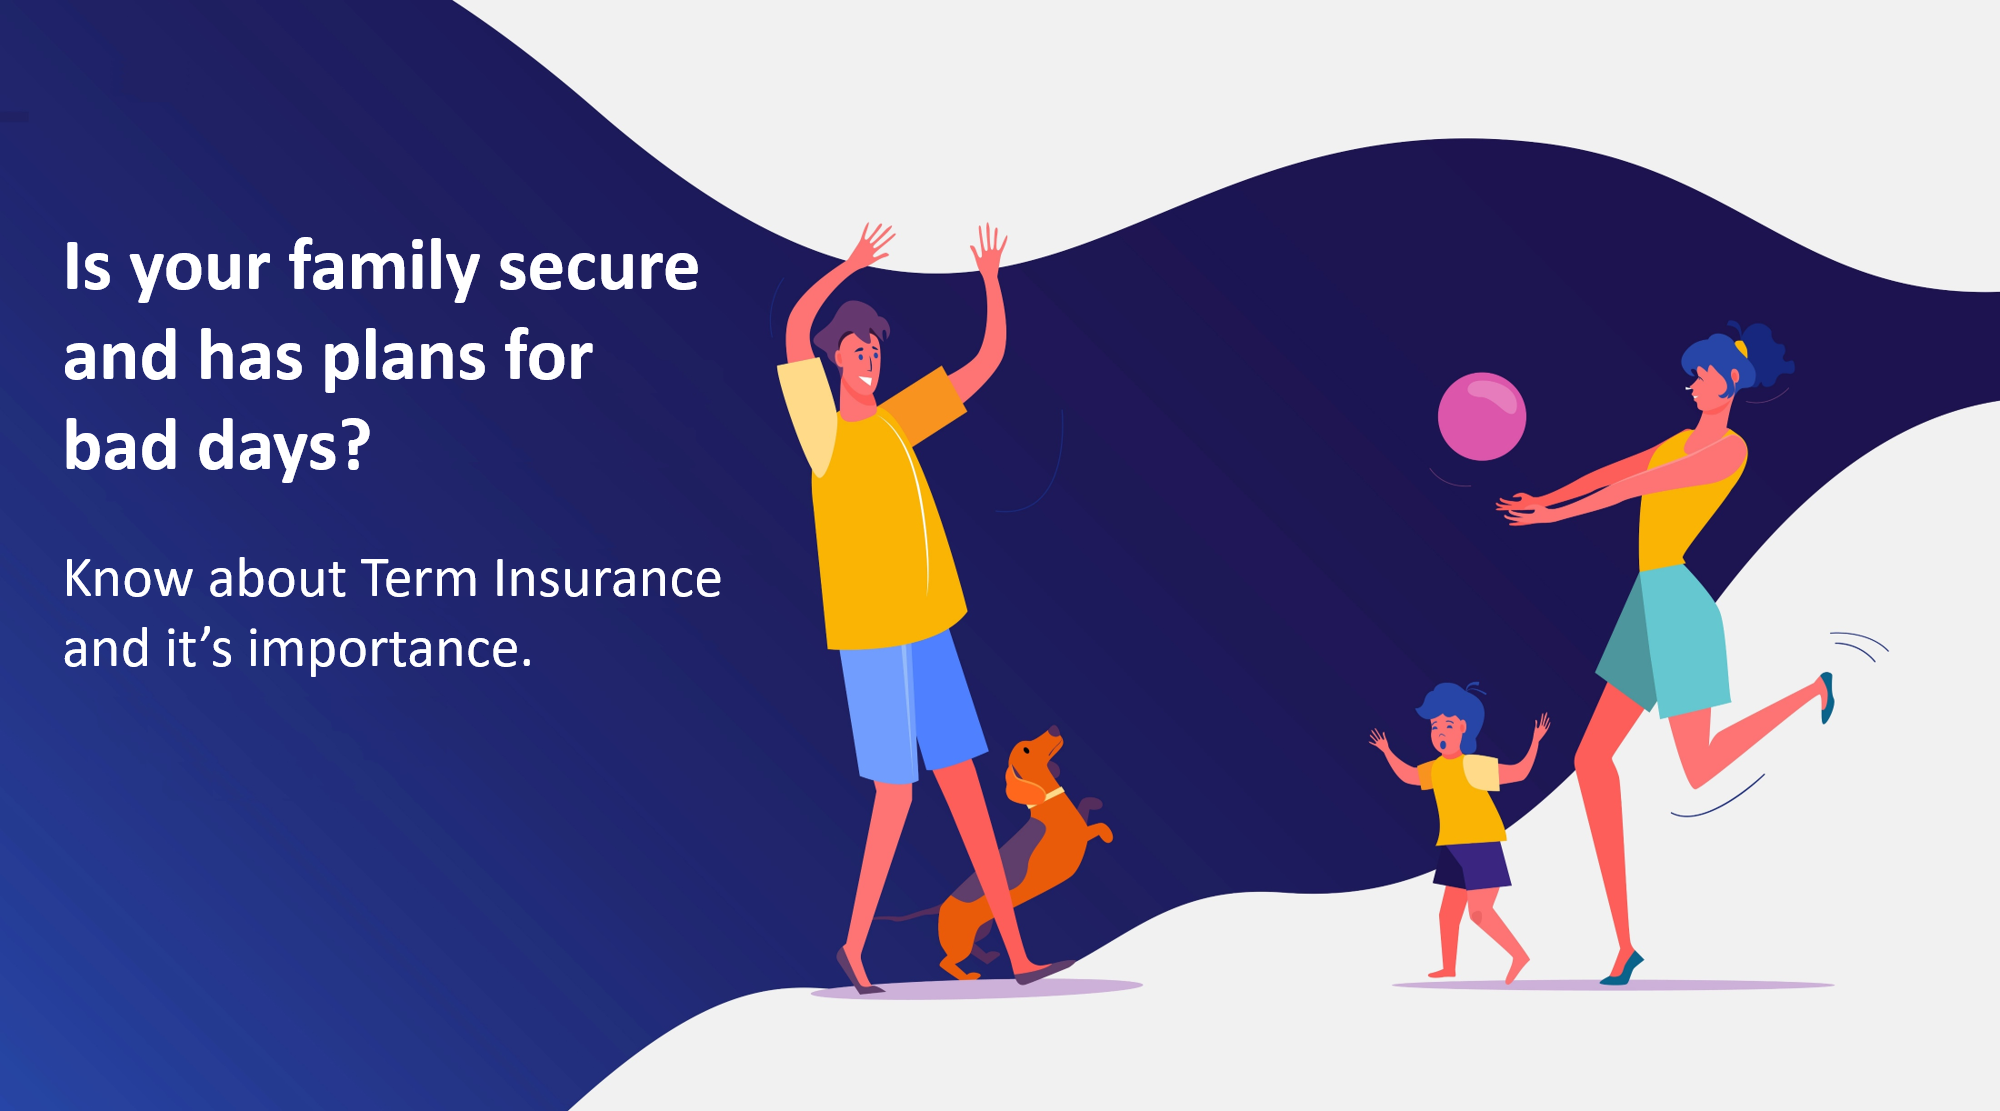 Term Insurance Simplified! Know it's importance in your life.